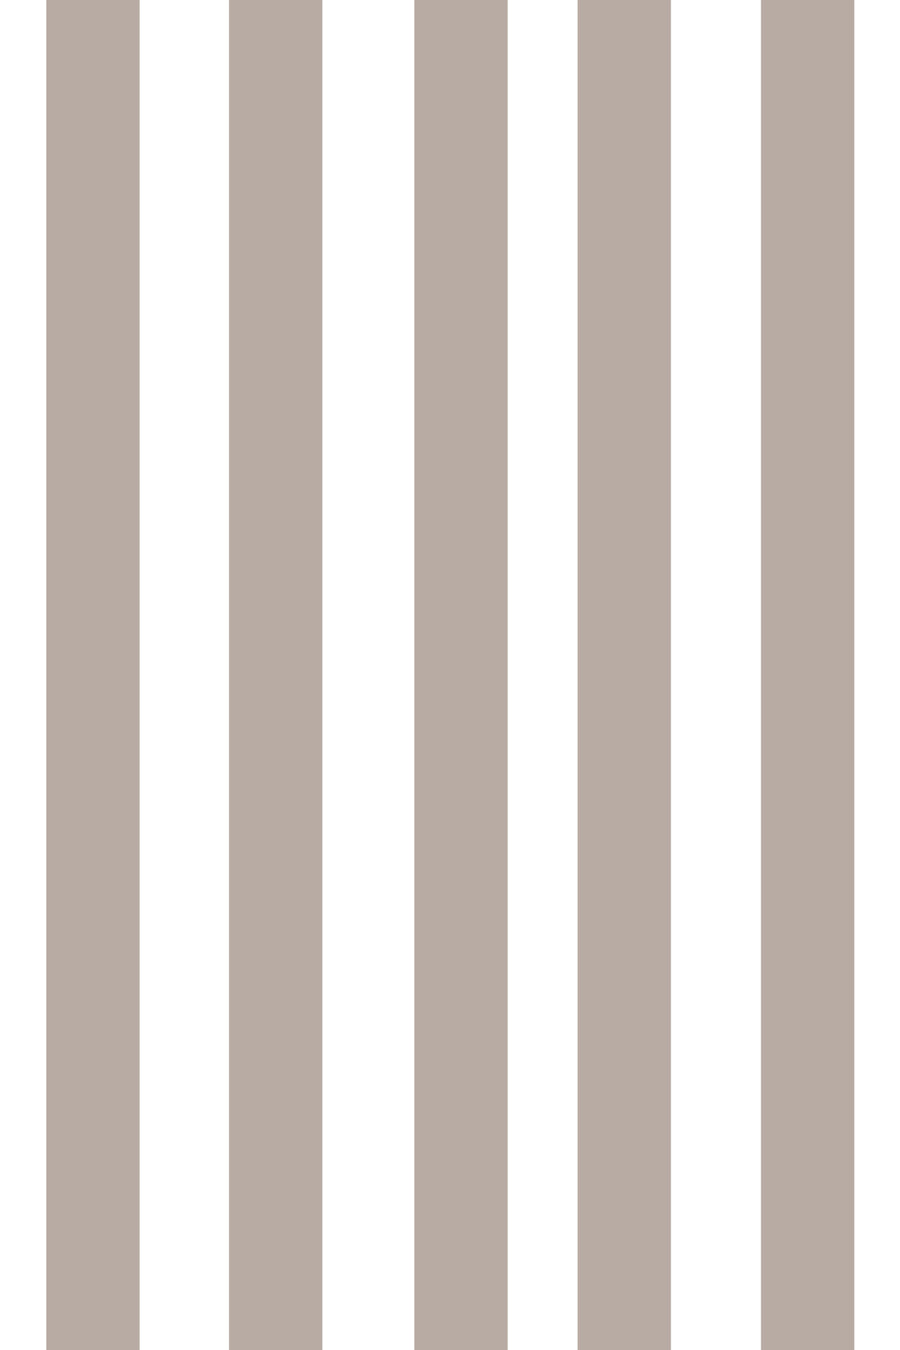 Woolf With Me Fitted Crib Sheet Stripes color_greige